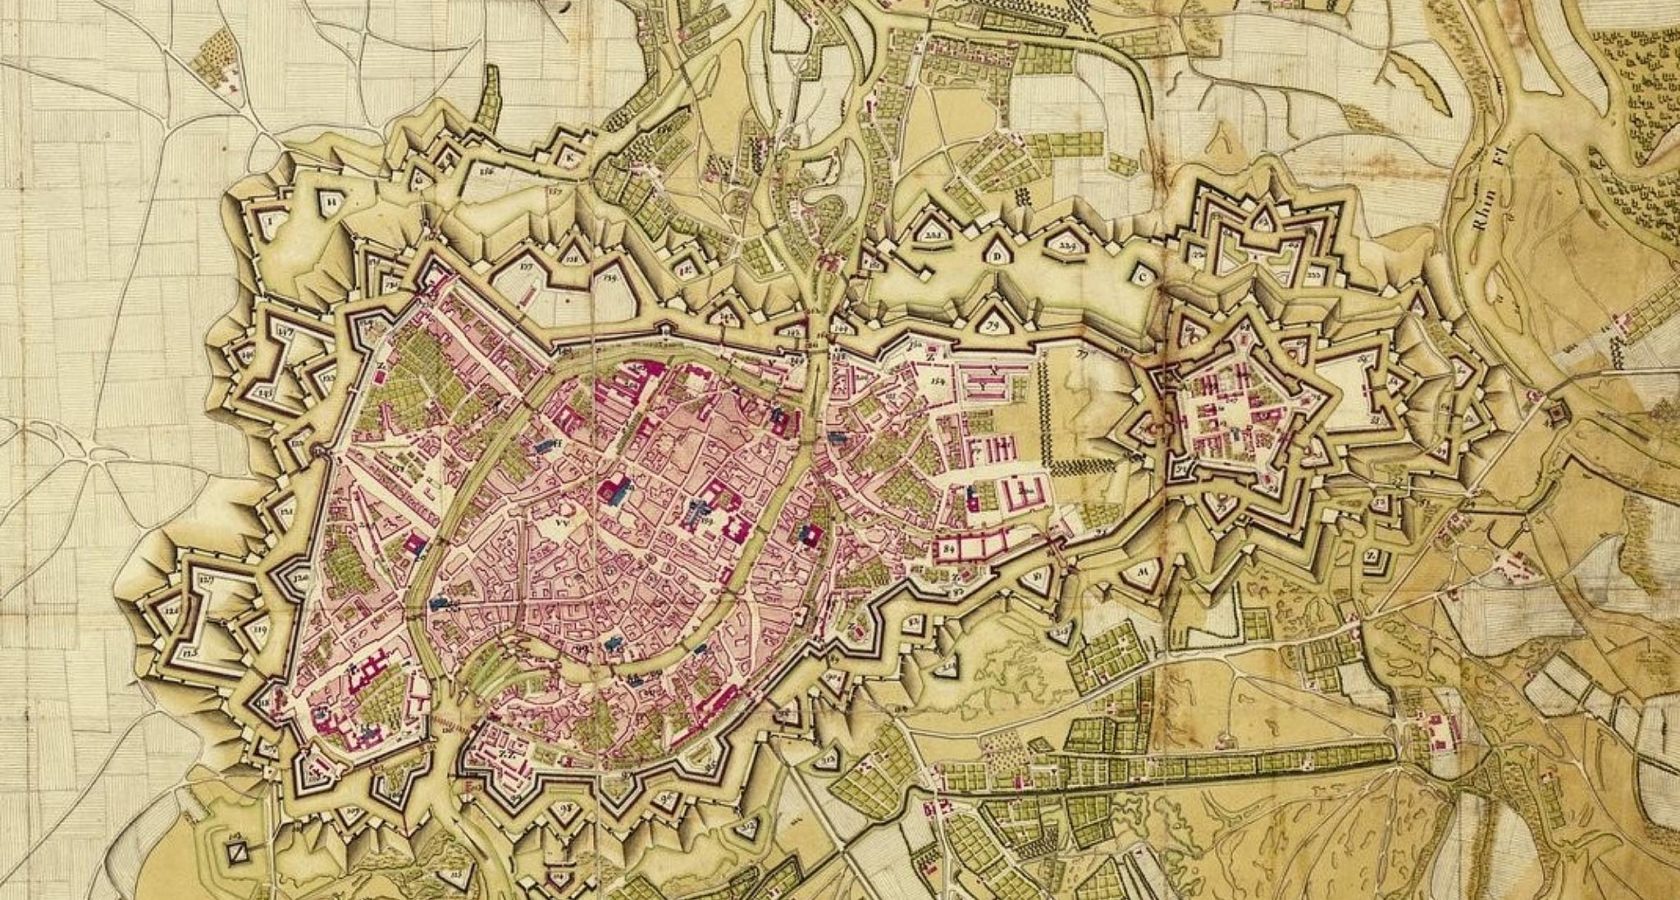 Map of Strasbourg showing Vauban fortifications in 1750. Credit: AVES